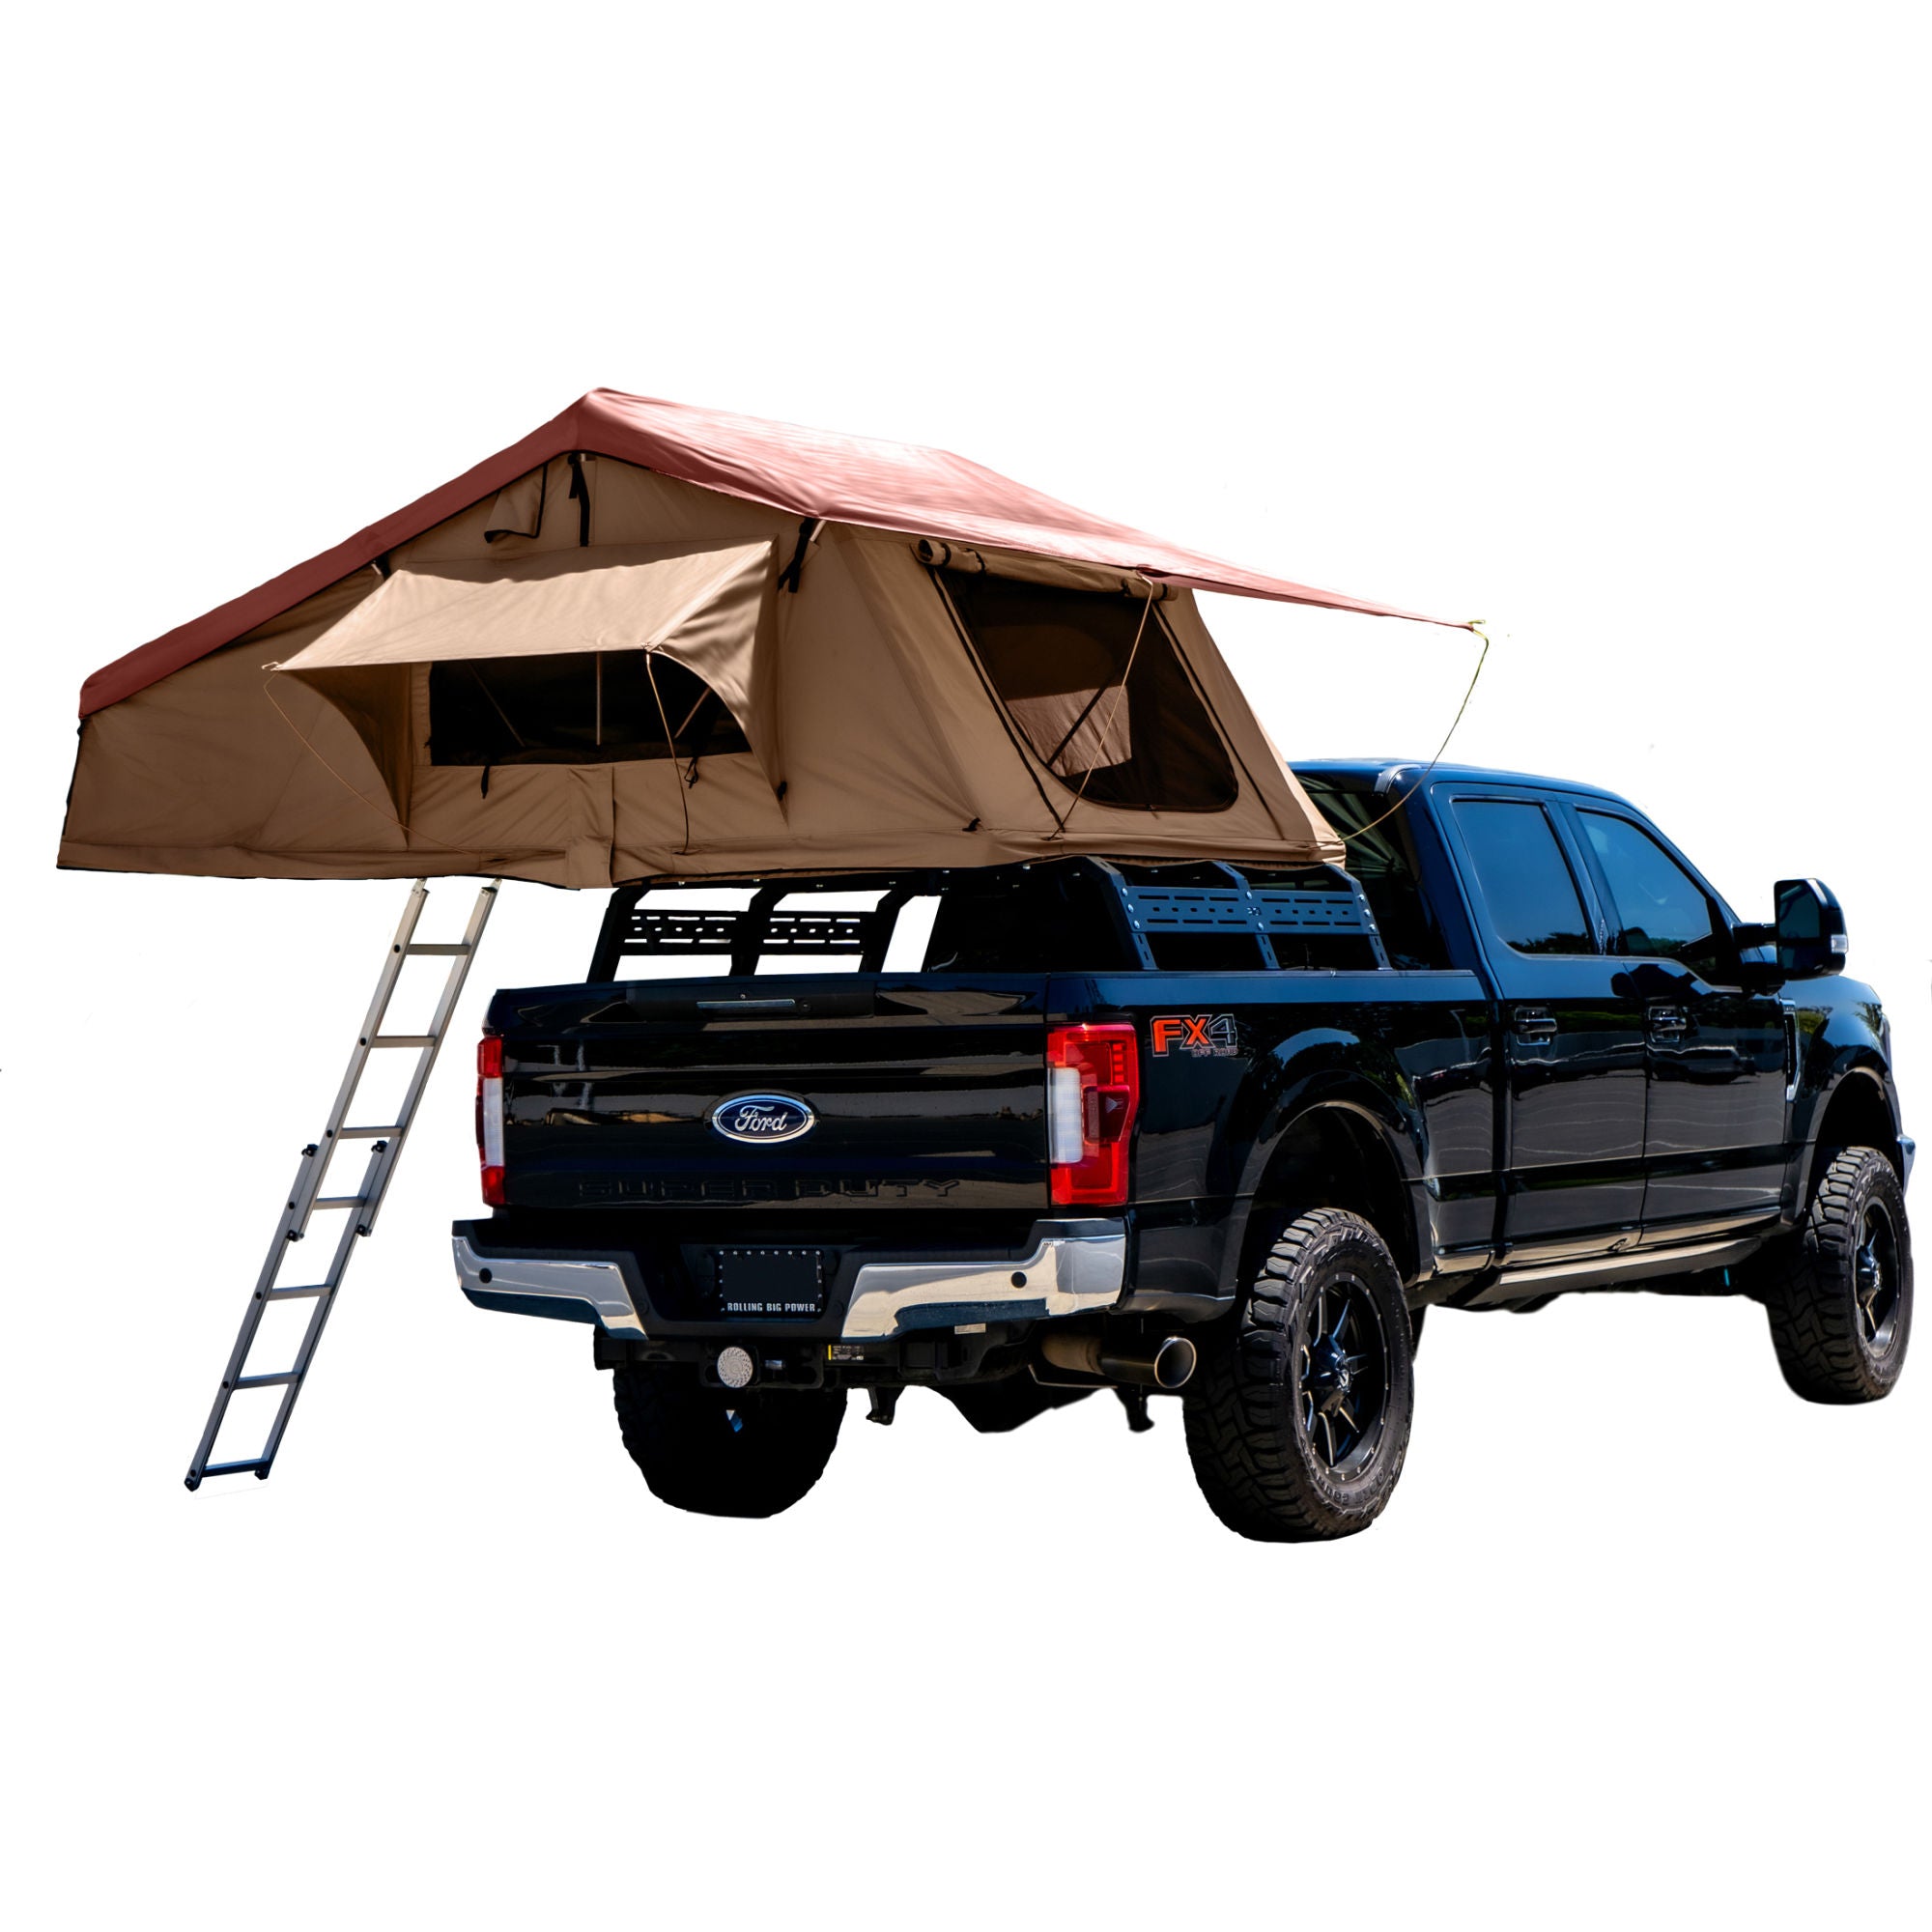 Trustmade Wander Pro Series - Extended Size Soft Shell Rooftop Tent-Soft Shell Rooftop Tent-Trustmade-open on ford-Car Camp Pro